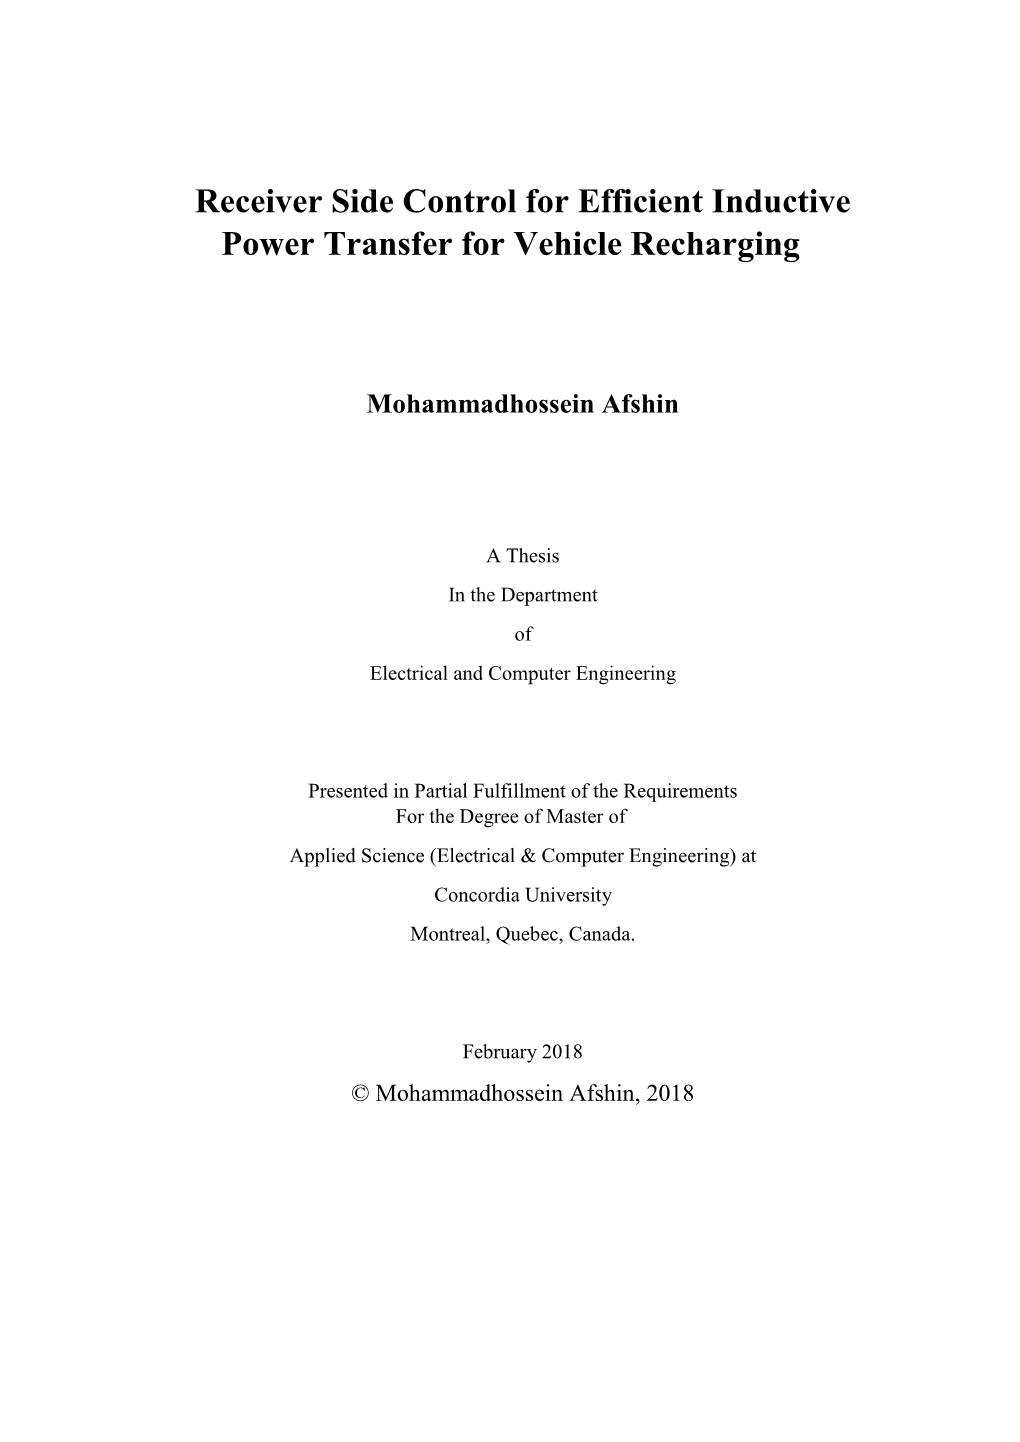 Receiver Side Control for Efficient Inductive Power Transfer for Vehicle Recharging